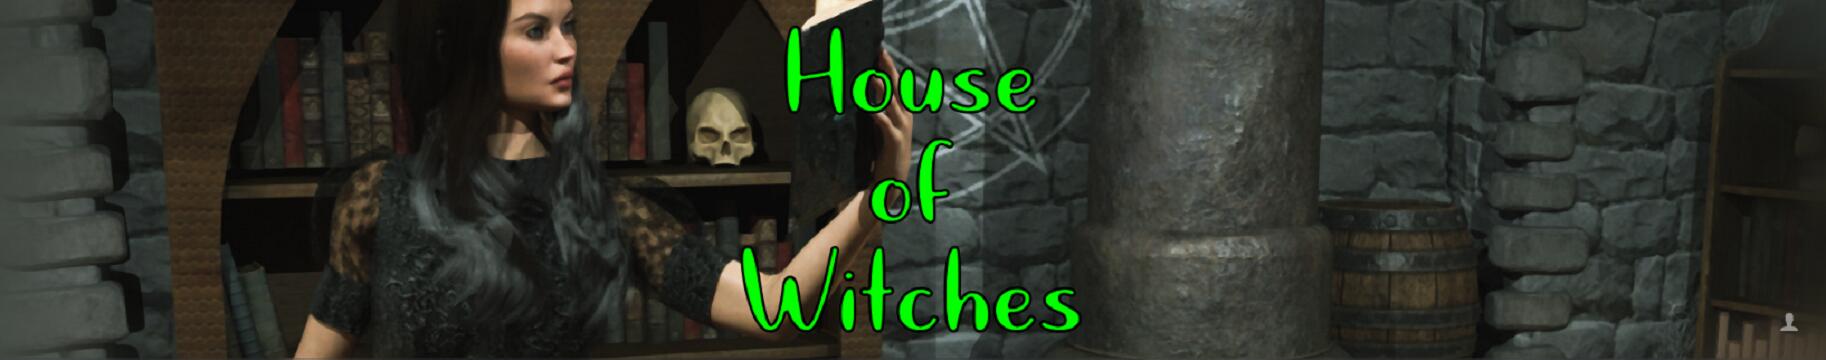 House of Witches Android Port